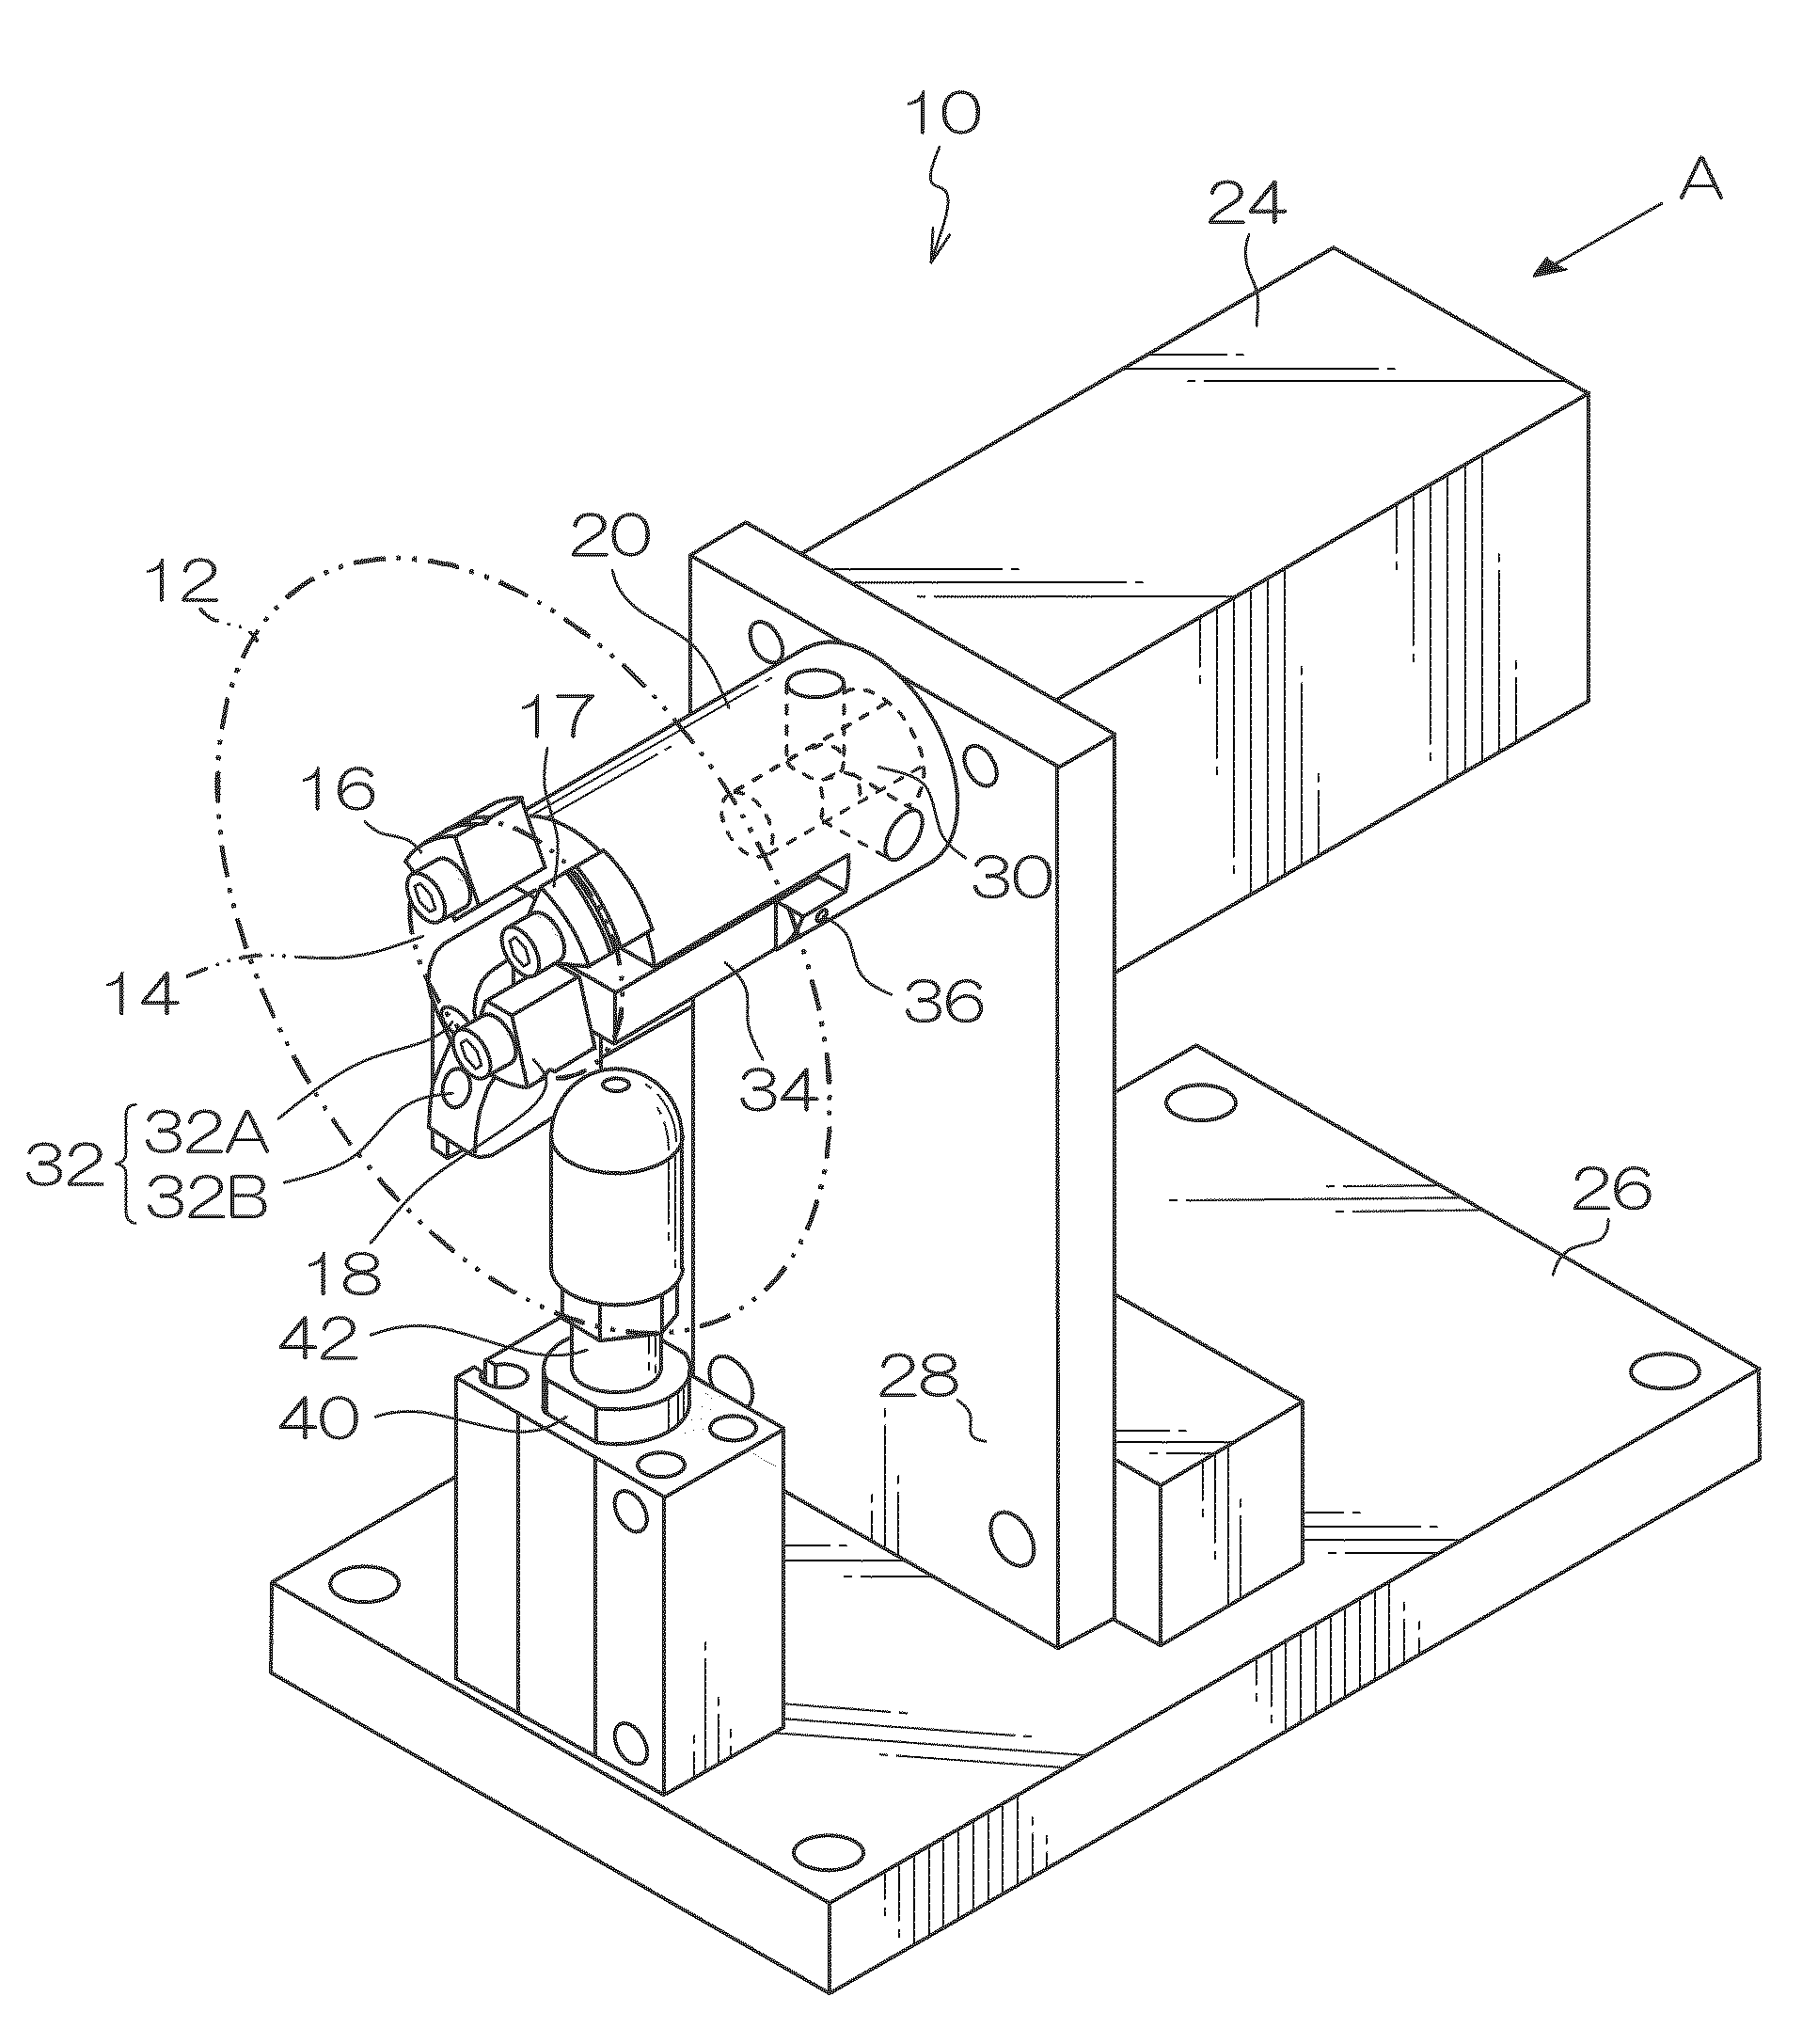 Hard disk inspection apparatus and method, as well as program